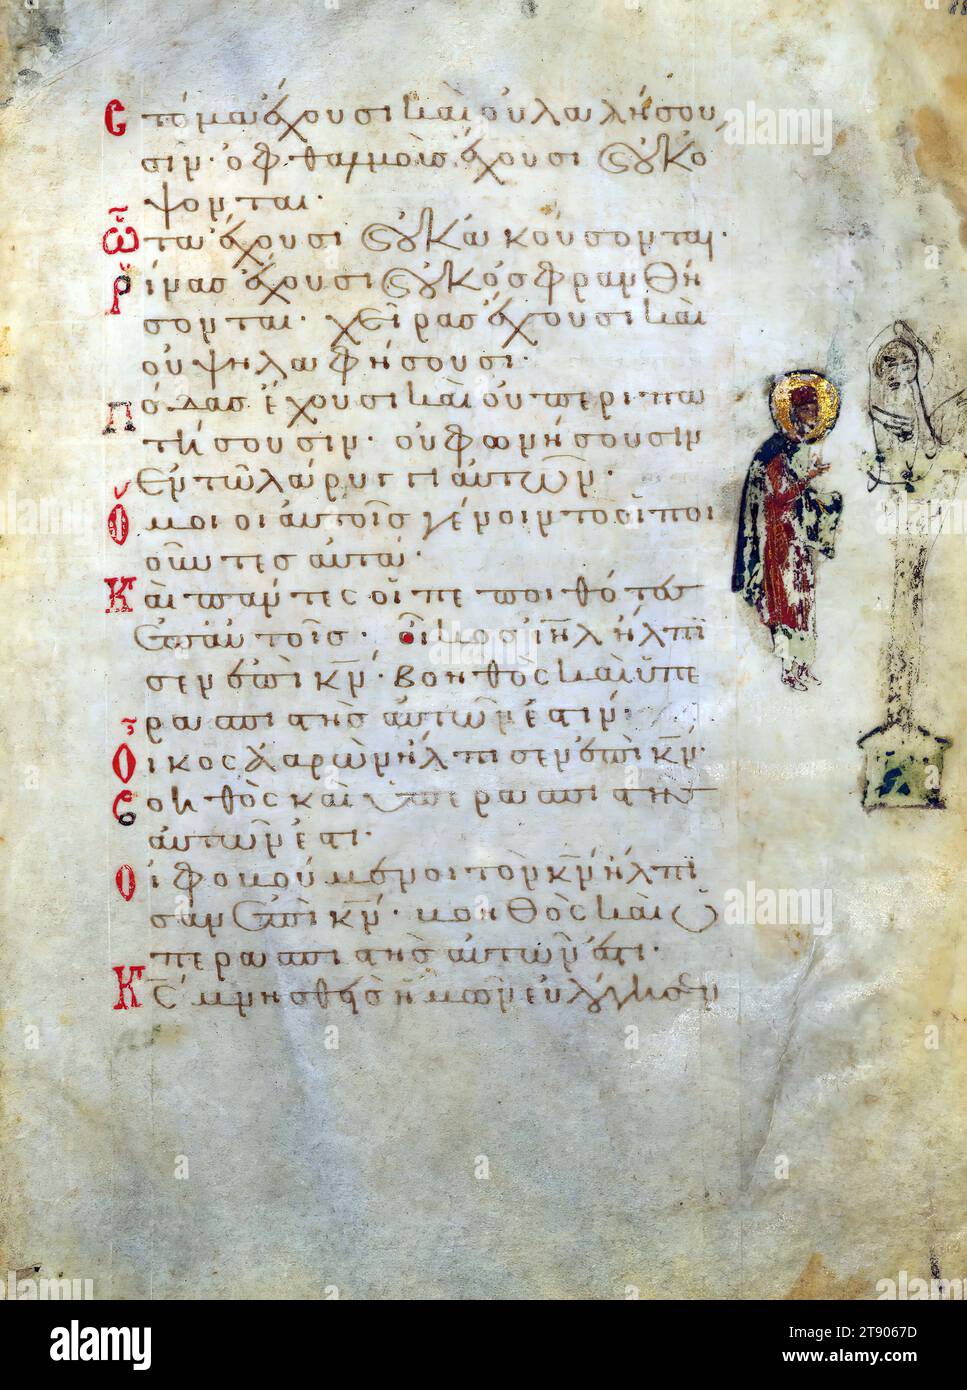 Psalter, David Pointing to an Idol, This manuscript, illustrated with 155 marginal paintings, is one the few surviving 'marginal psalters,' in which images provide a pictorial commentary on the Biblical text. Other examples include the Khludov Psalter, the Barberini Psalter, the Theodore Psalter, and a Cyrillic psalter made in Kiev Stock Photo